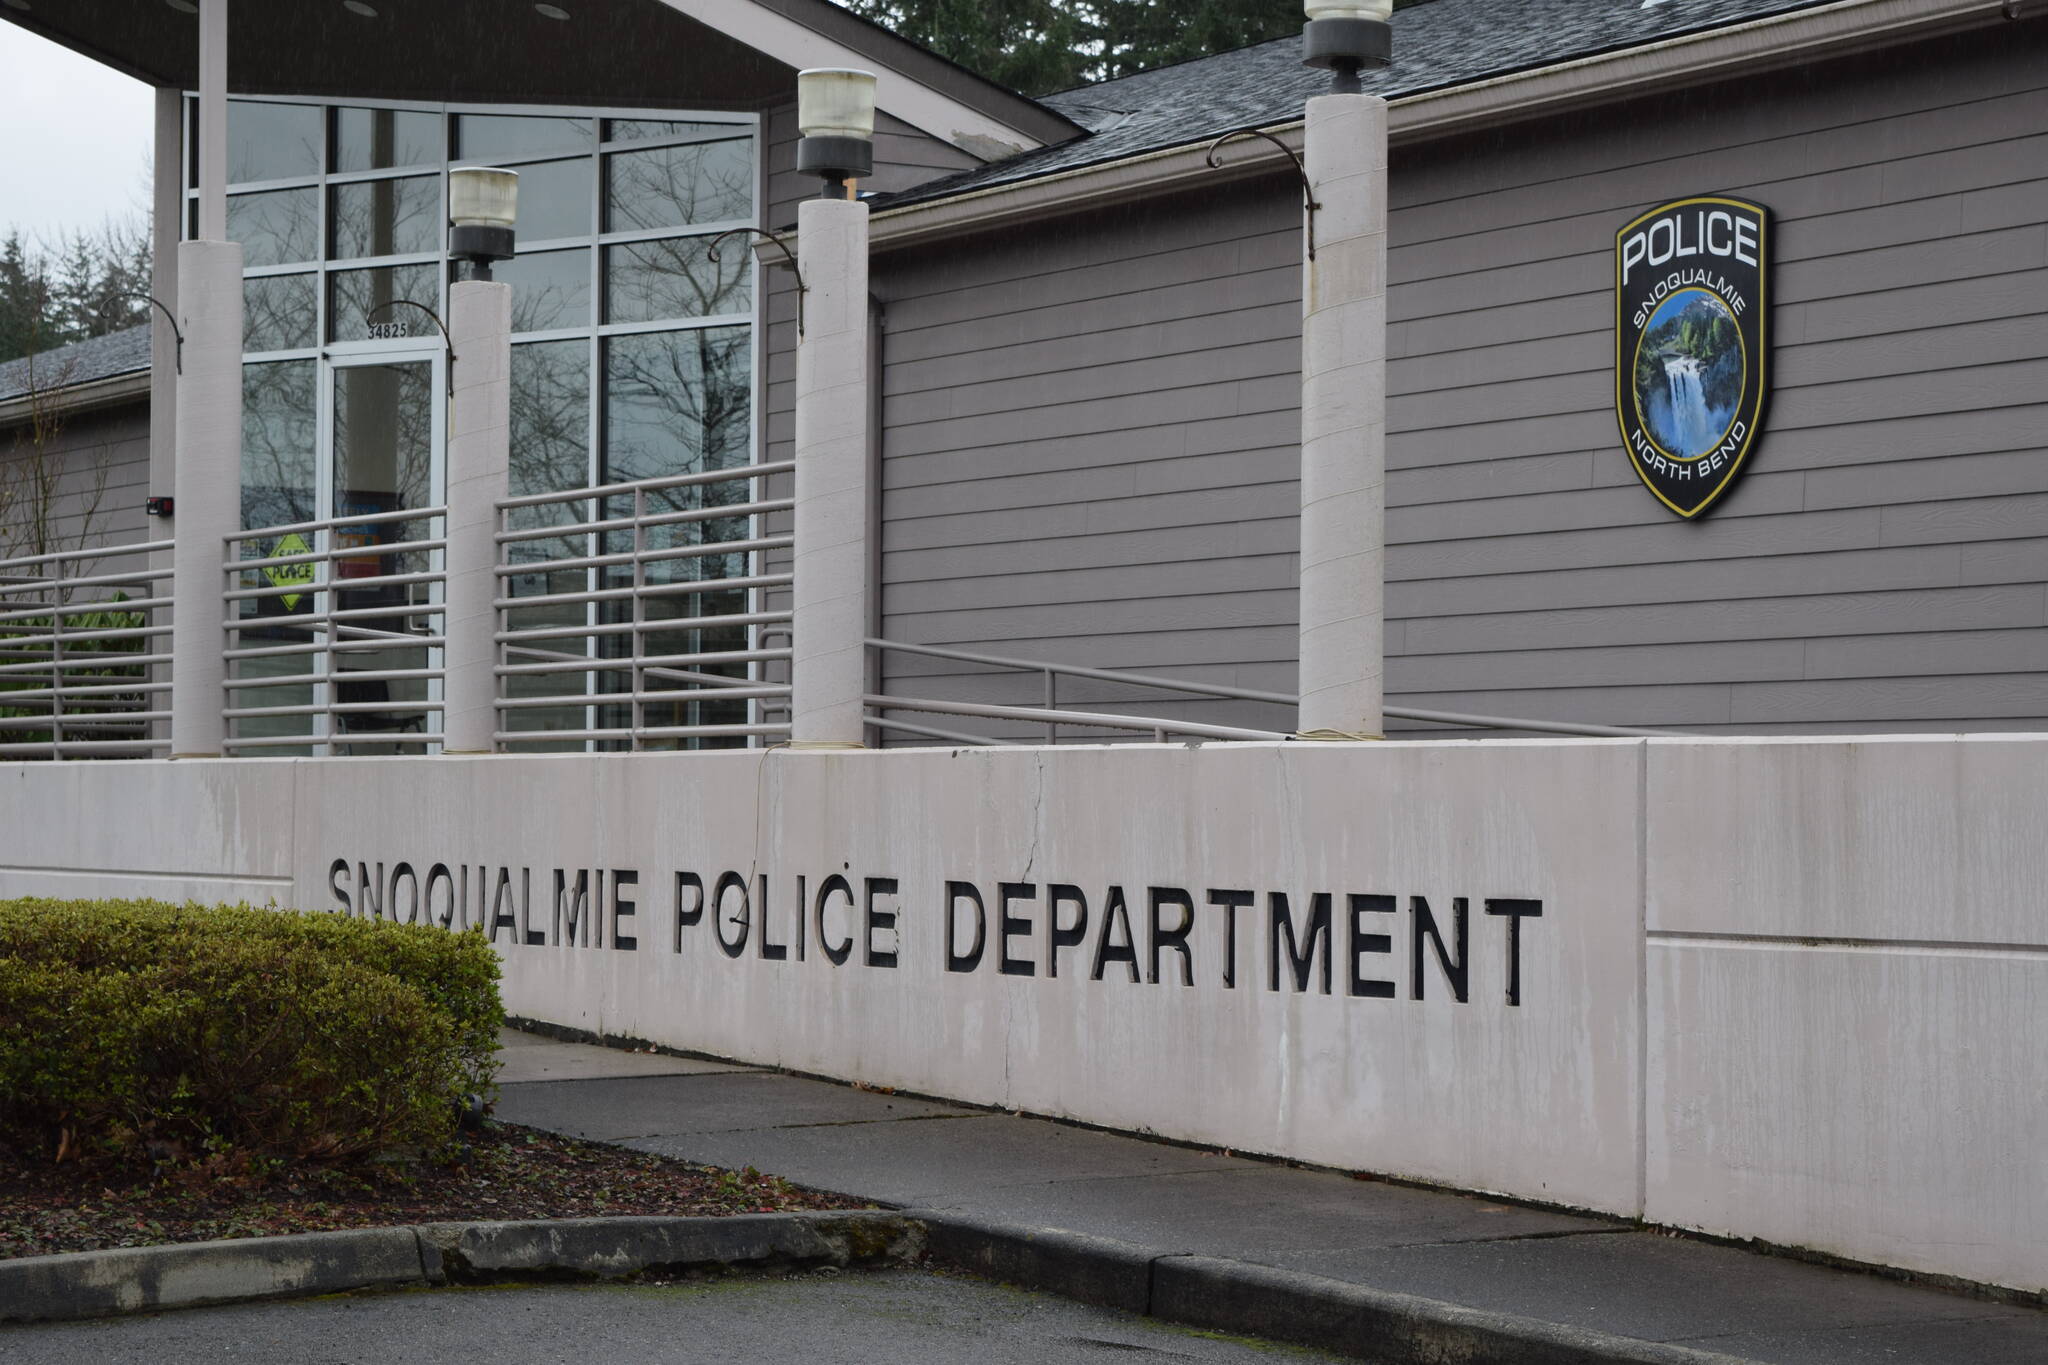 Outside of the Snoqualmie Police Department. Photo by Conor Wilson/Valley Record
Outside of the Snoqualmie Police Department. Photo by Conor Wilson/Valley Record